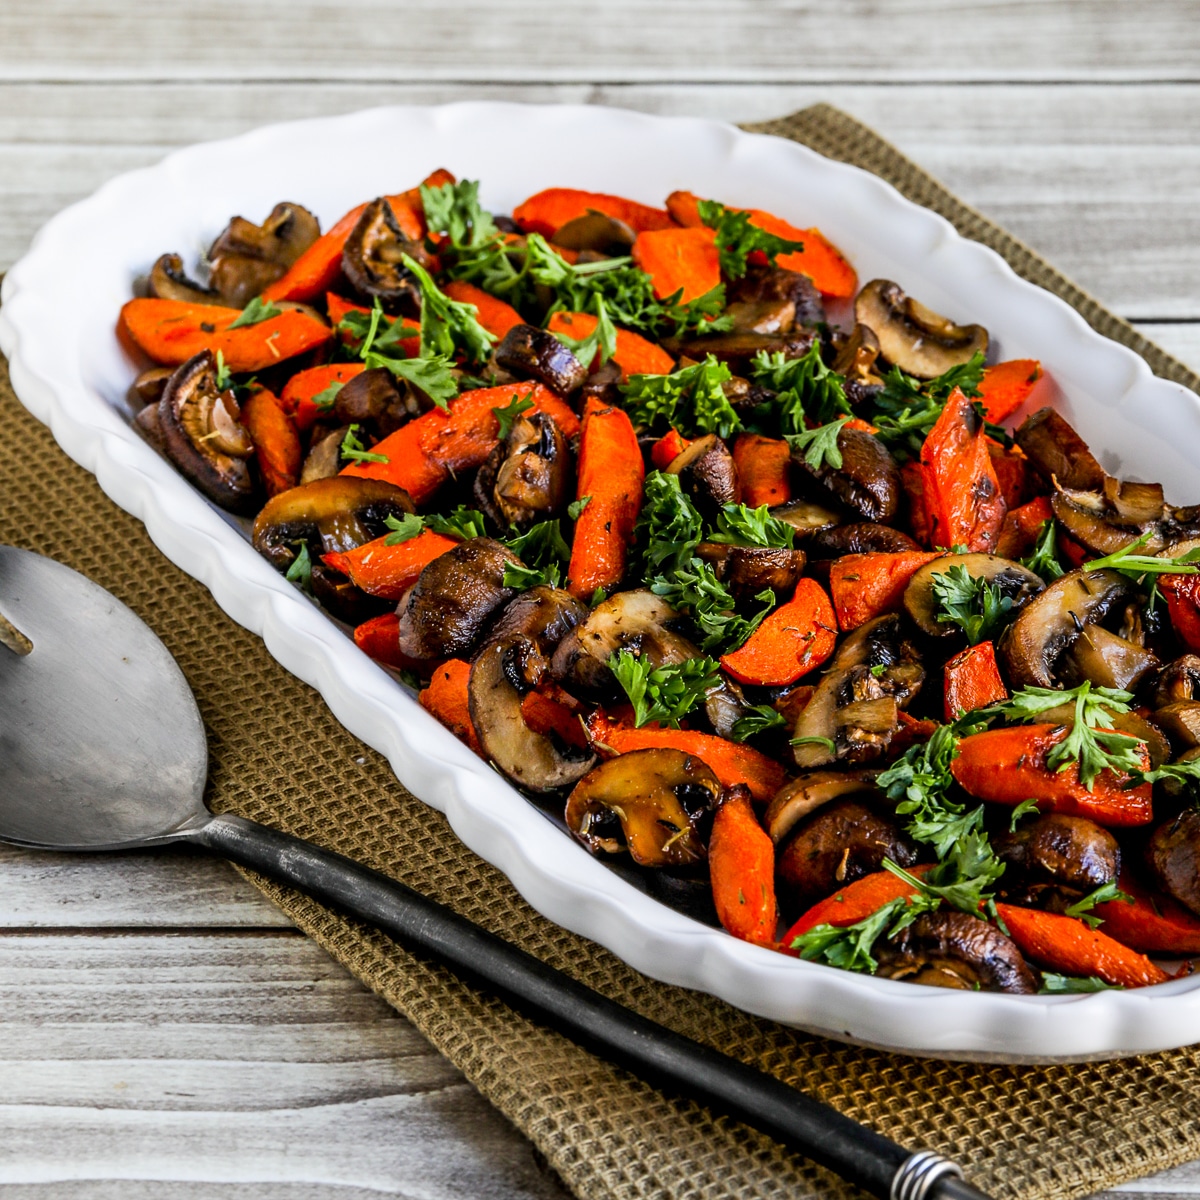 Roasted carrots and mushrooms on a serving plate with a fork